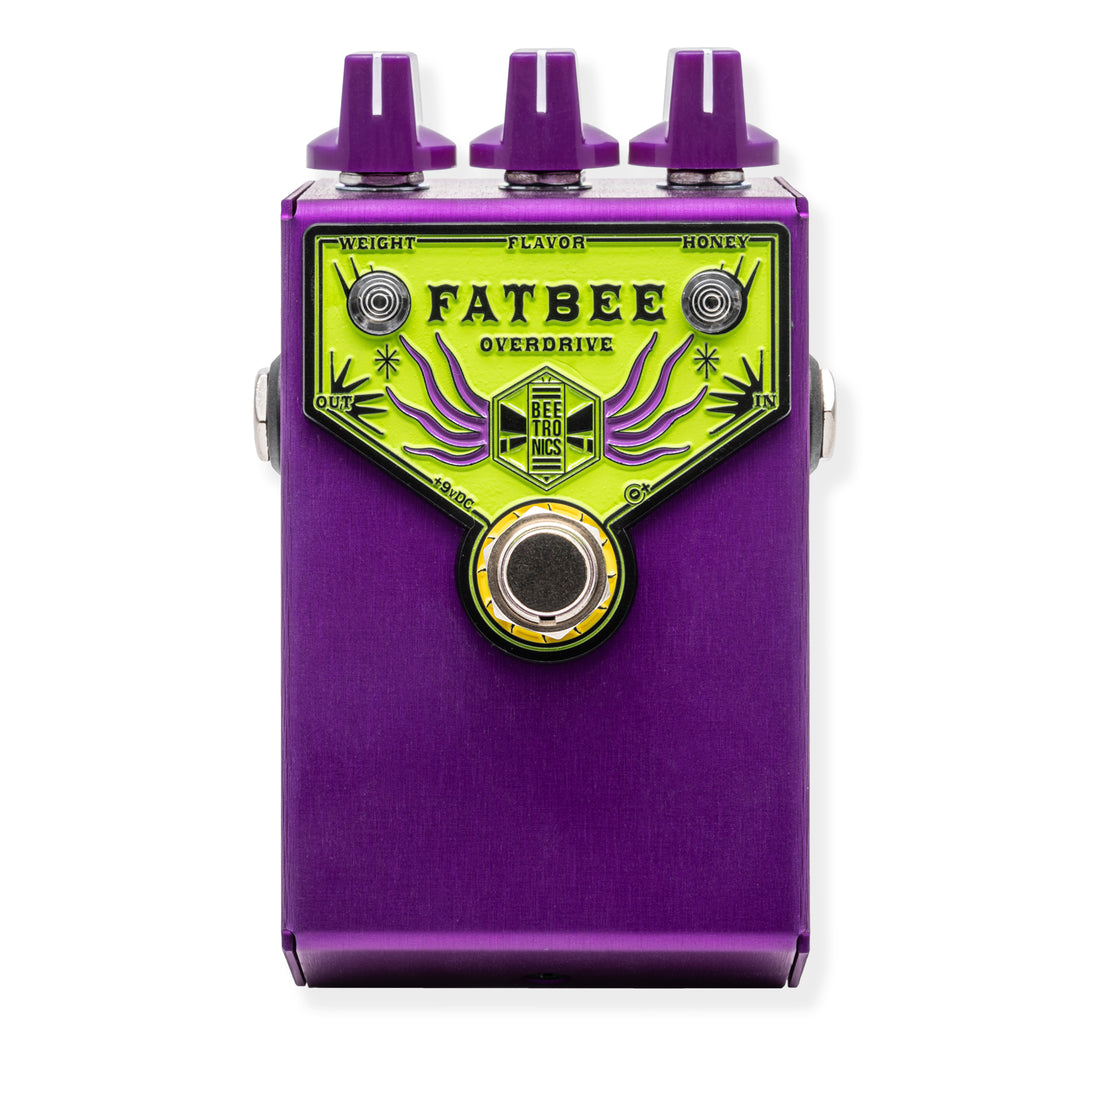 FATBEE - Overdrive &lt;p&gt; Limited Edition &quot;Donatello&quot;